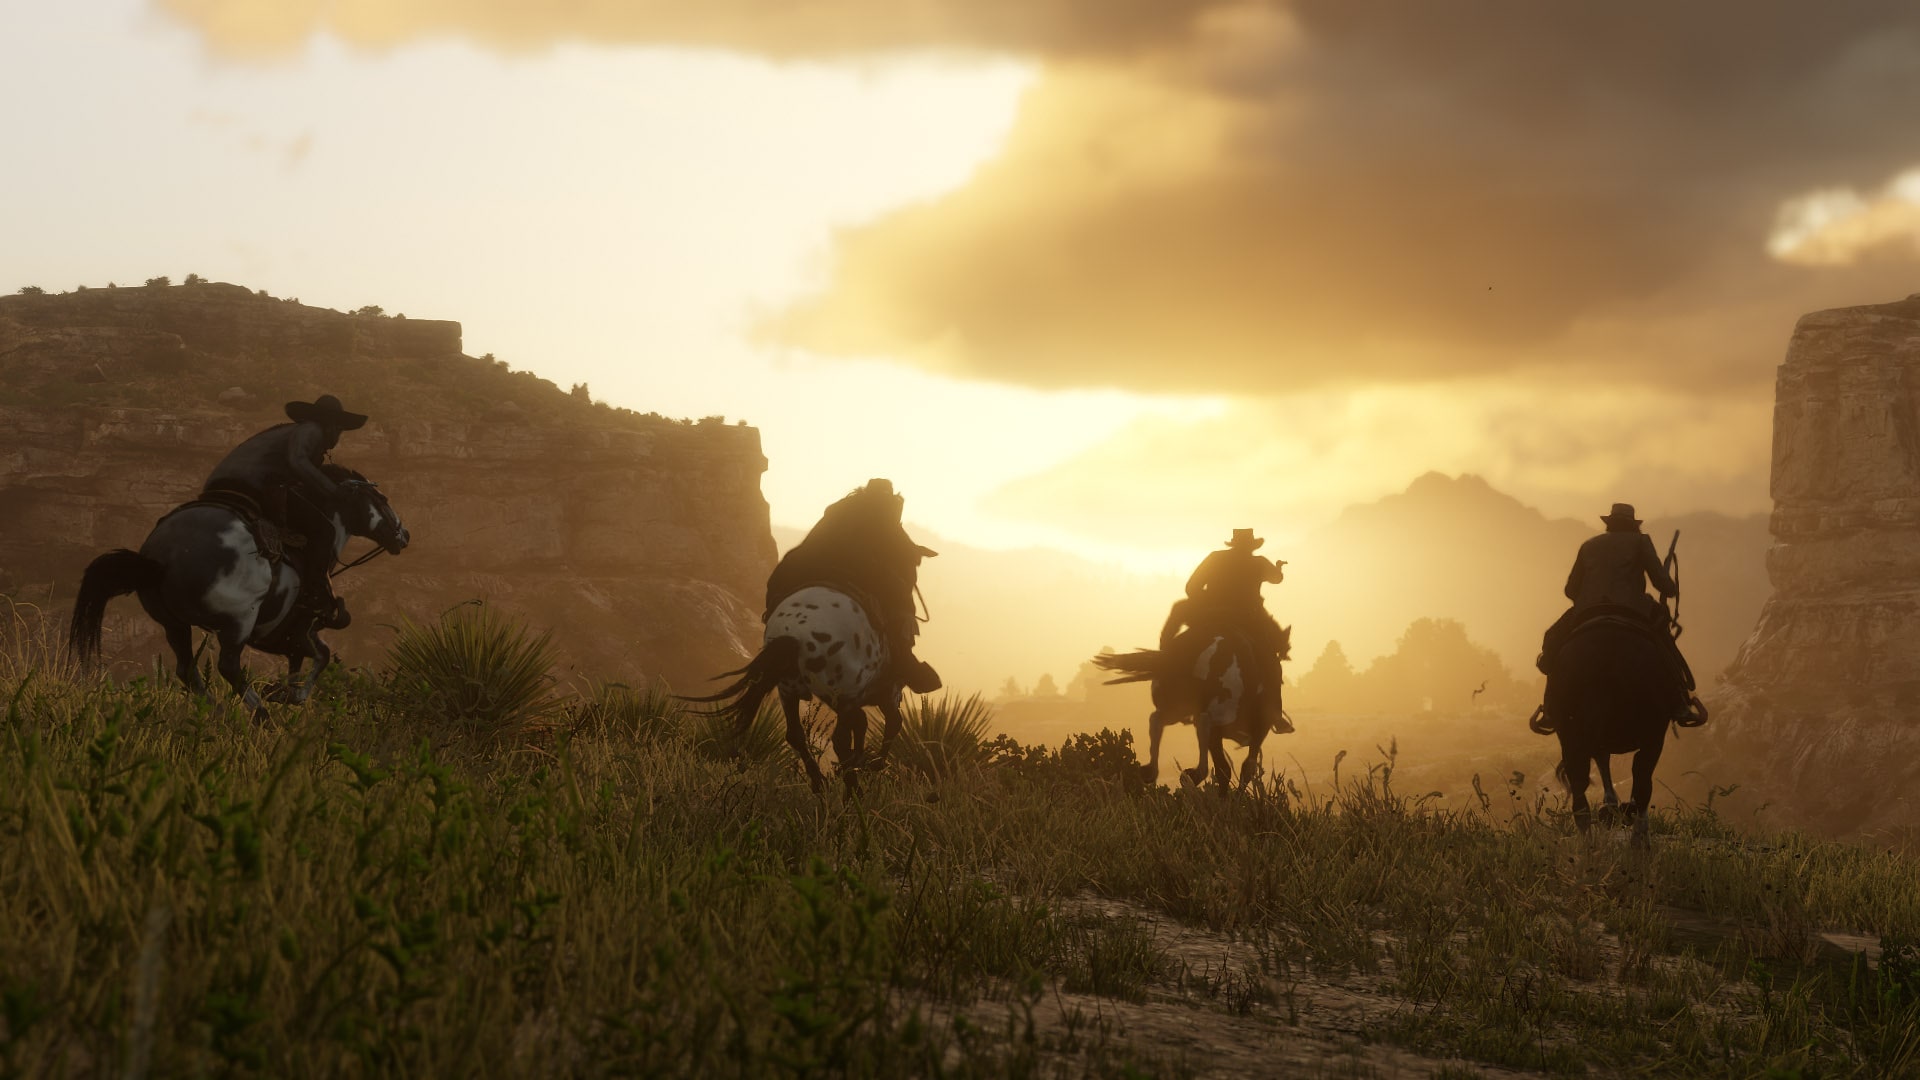 red dead redemption 2 ps4 ps store